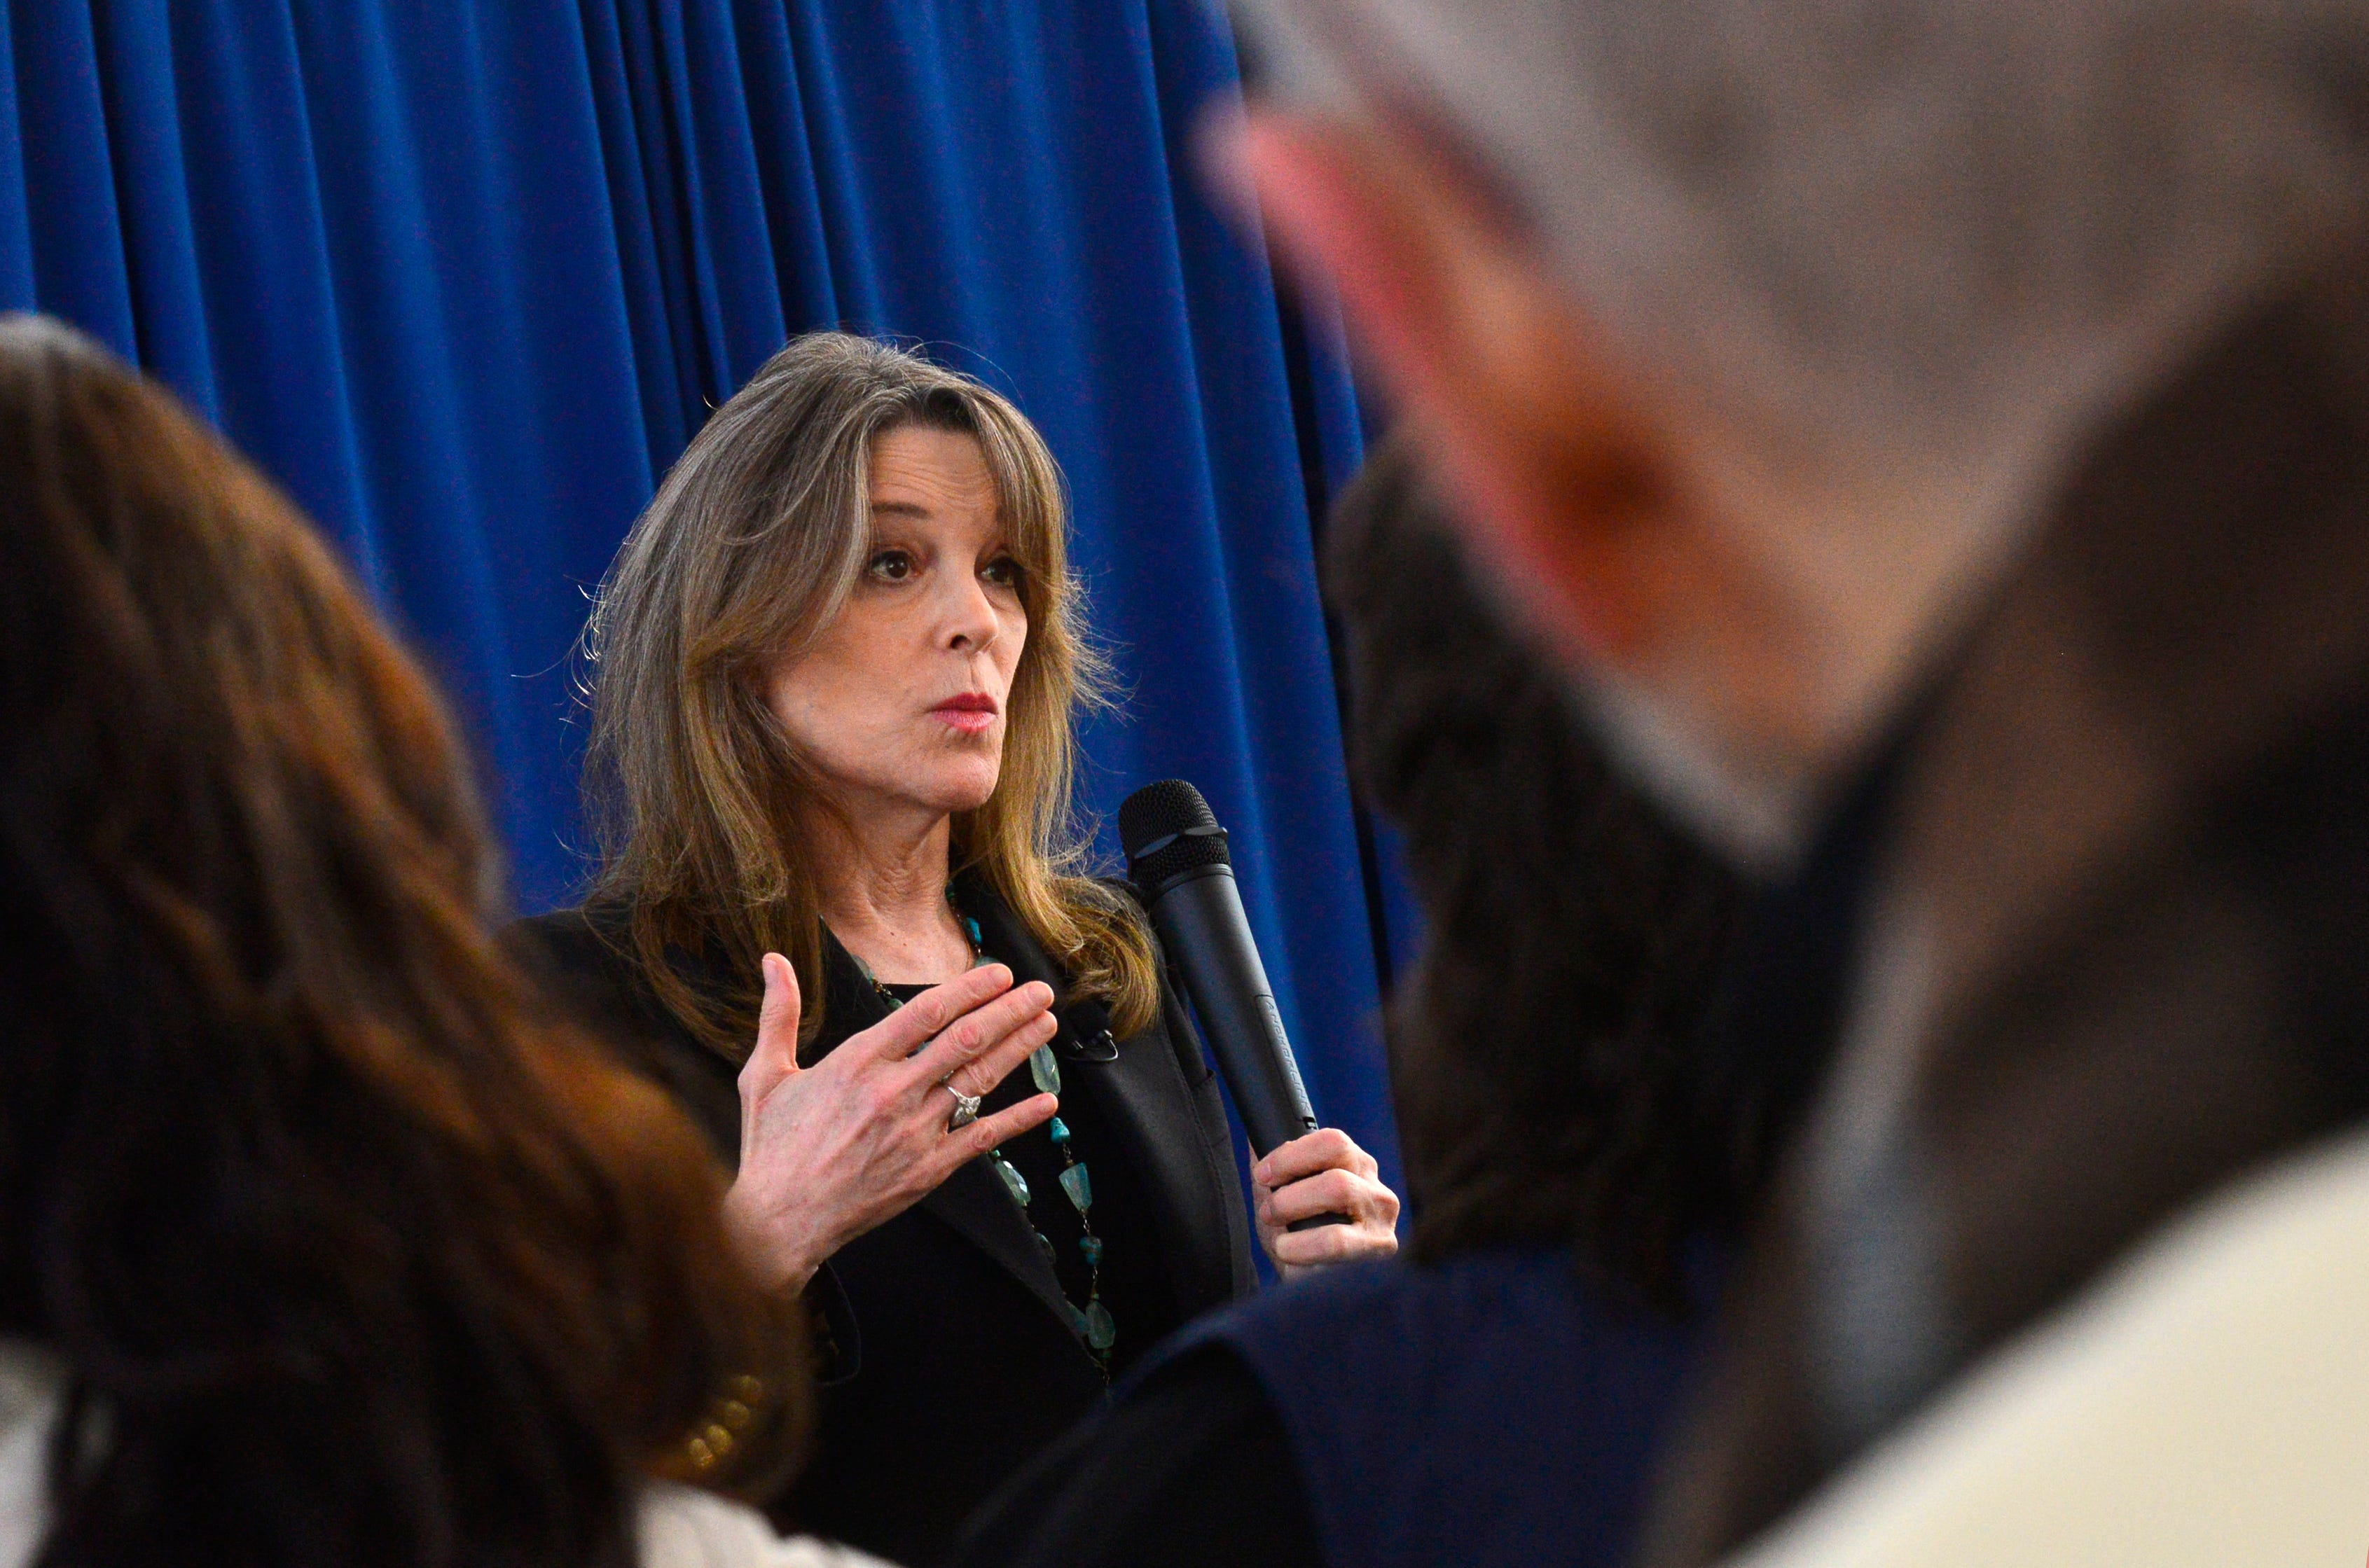 Marianne Williamson, a Democrat from Iowa and presidential candidate, talks about creating a cabinet position to deal with the youth of America during a campaign stop at Keene State College's student union in Keene, N.H.